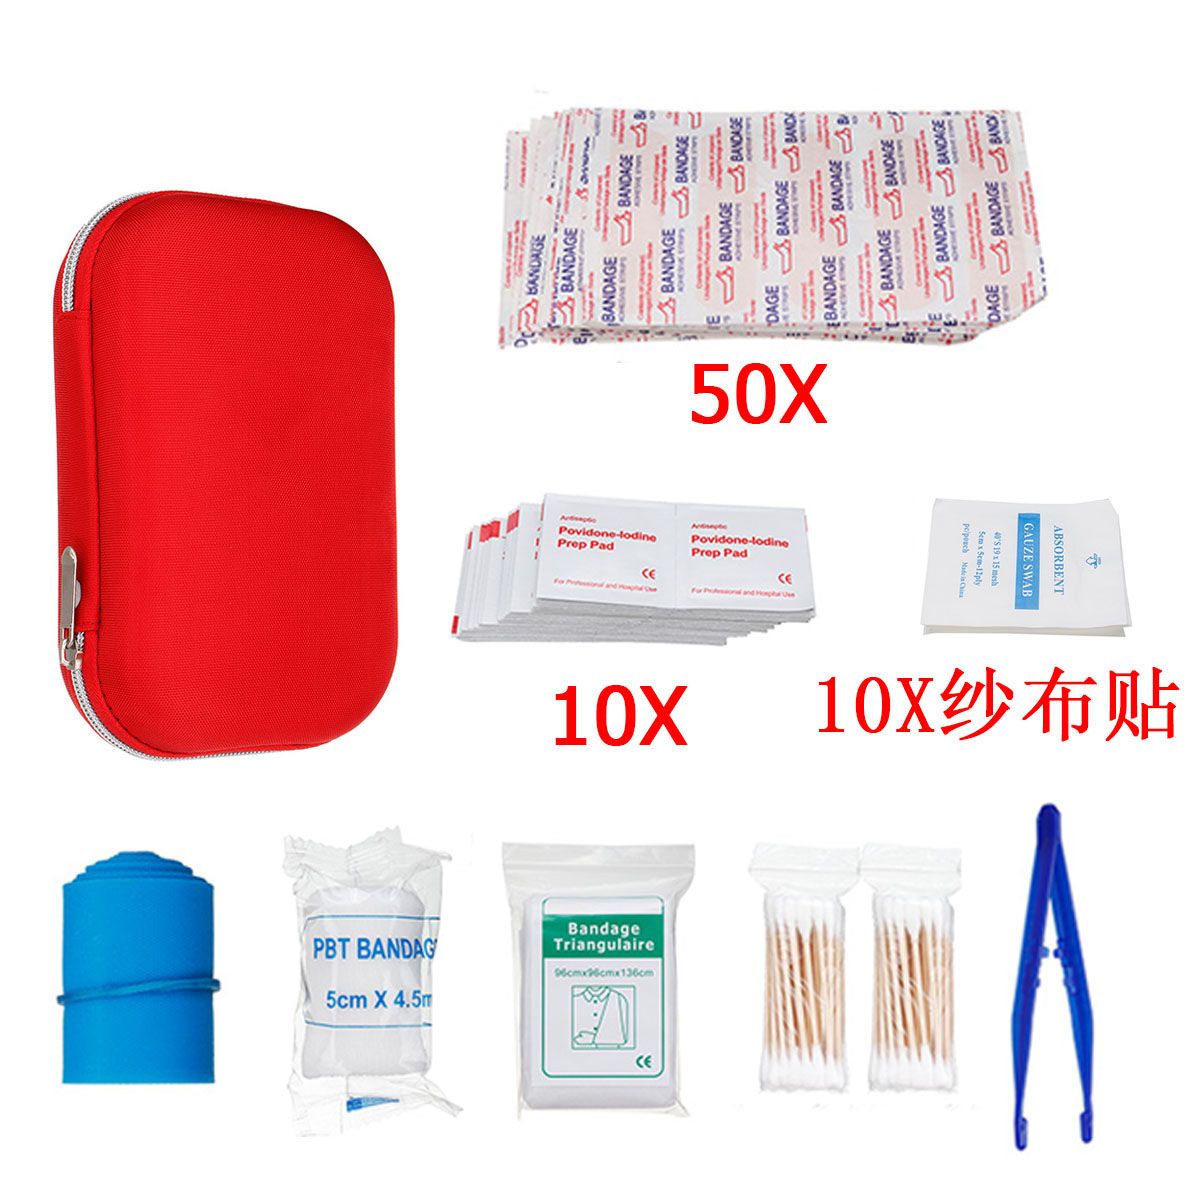 145Pcs-Upgraded-Outdoor--Indoor-Emergency-Survival-First-Aid-Kit-Survival-Gear-for-Home-Office-Car-B-1543194